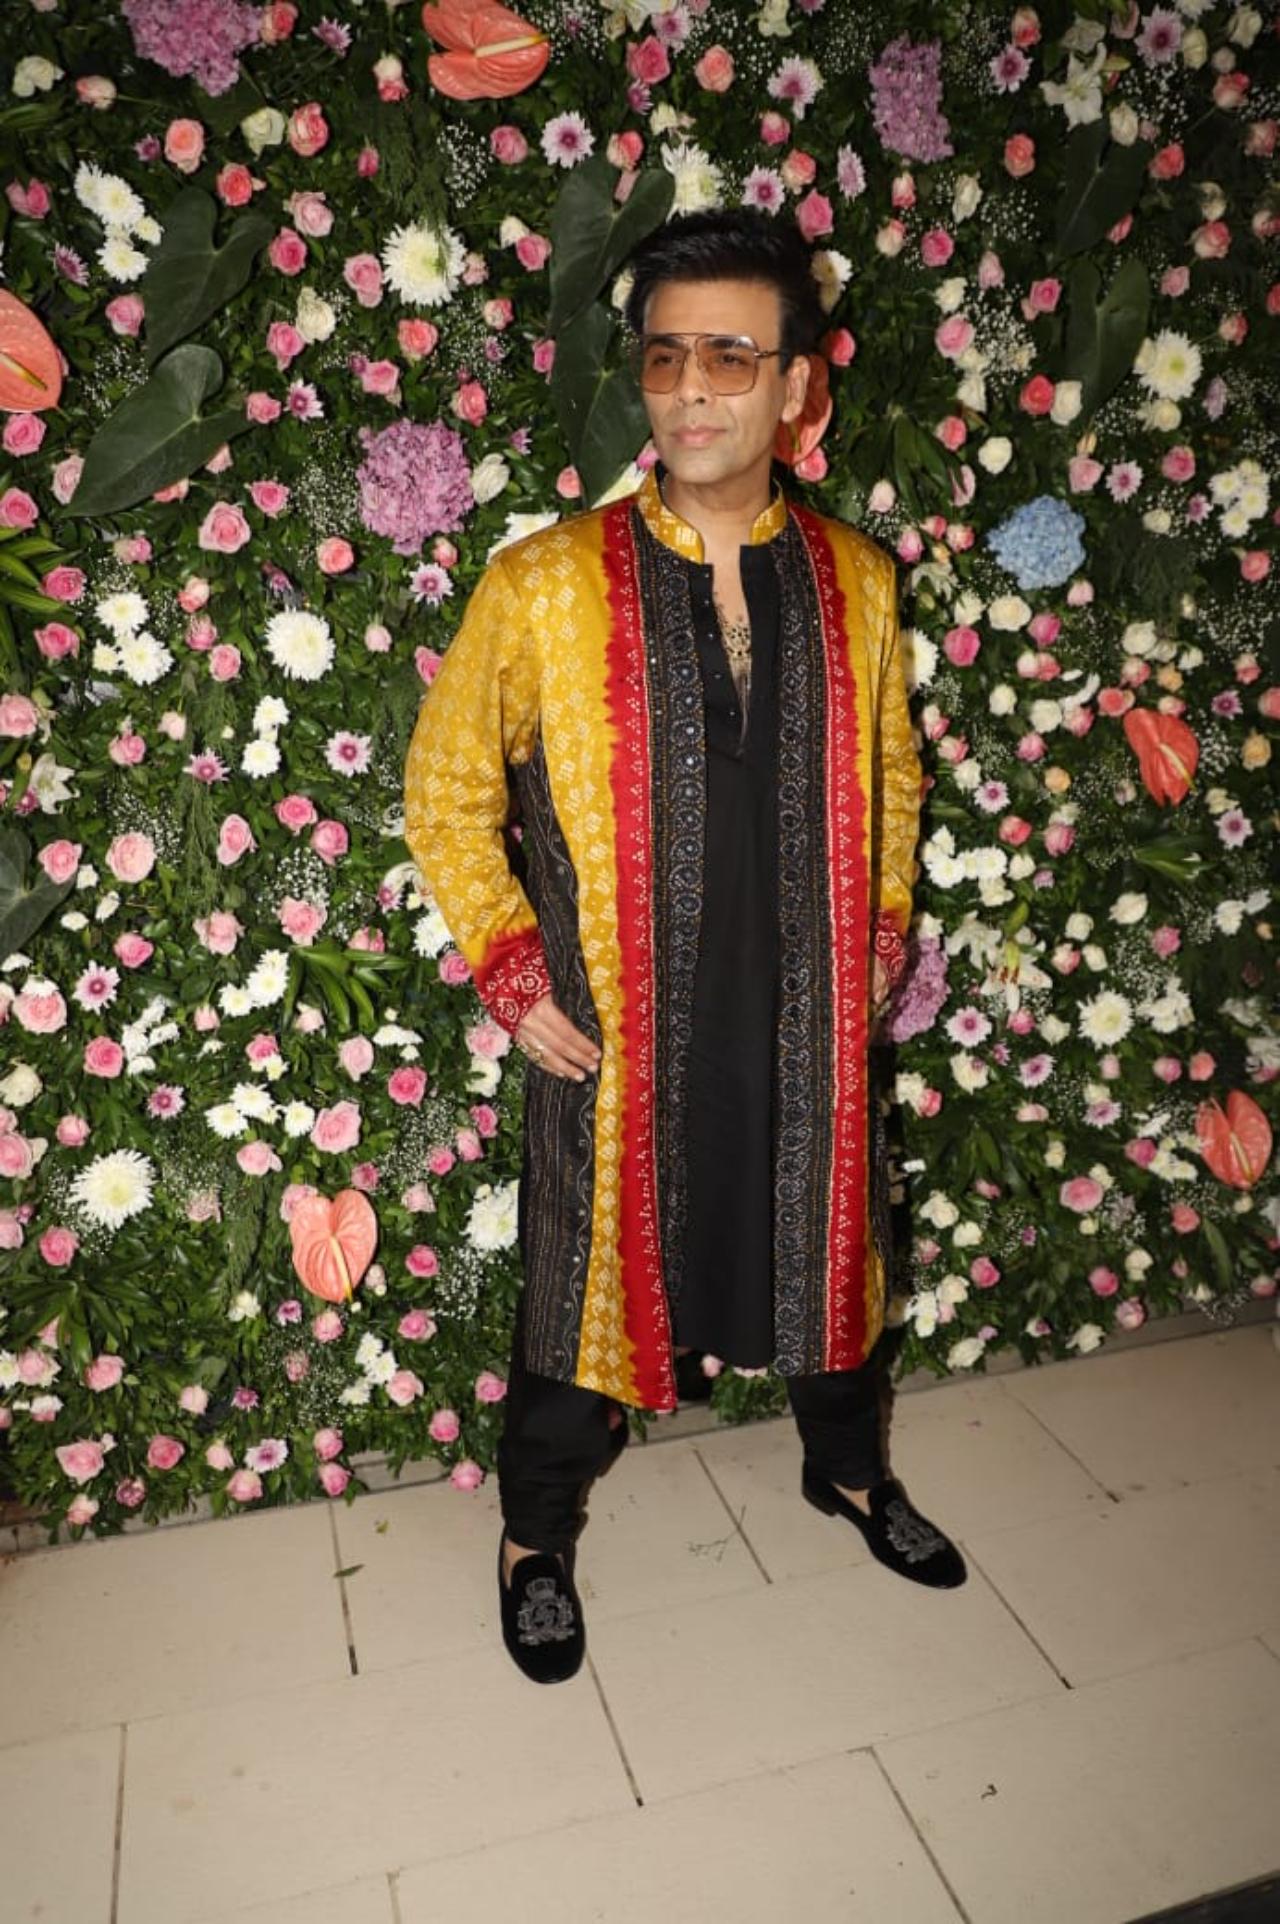 Karan Johar opted for a multi-coloured kurta and struck some cool poses for the paps before heading into the party